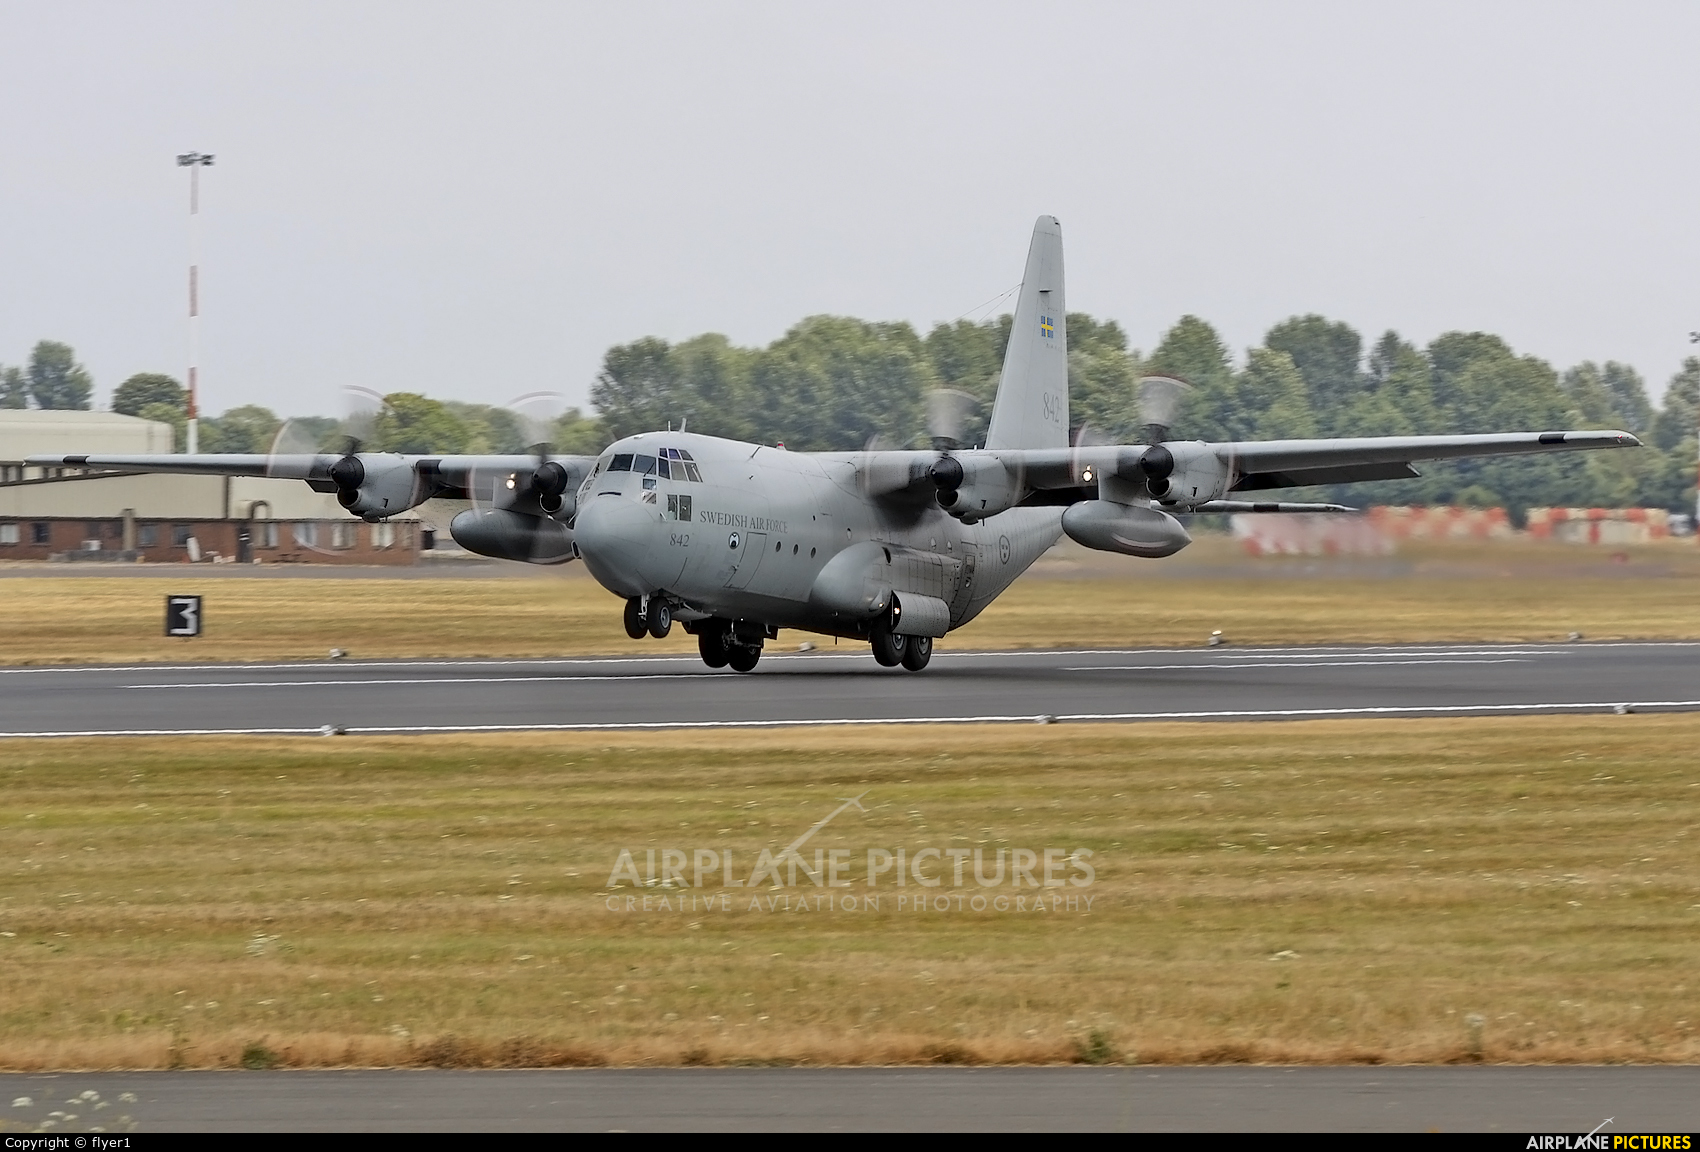 Sweden - Air Force 842 aircraft at Fairford